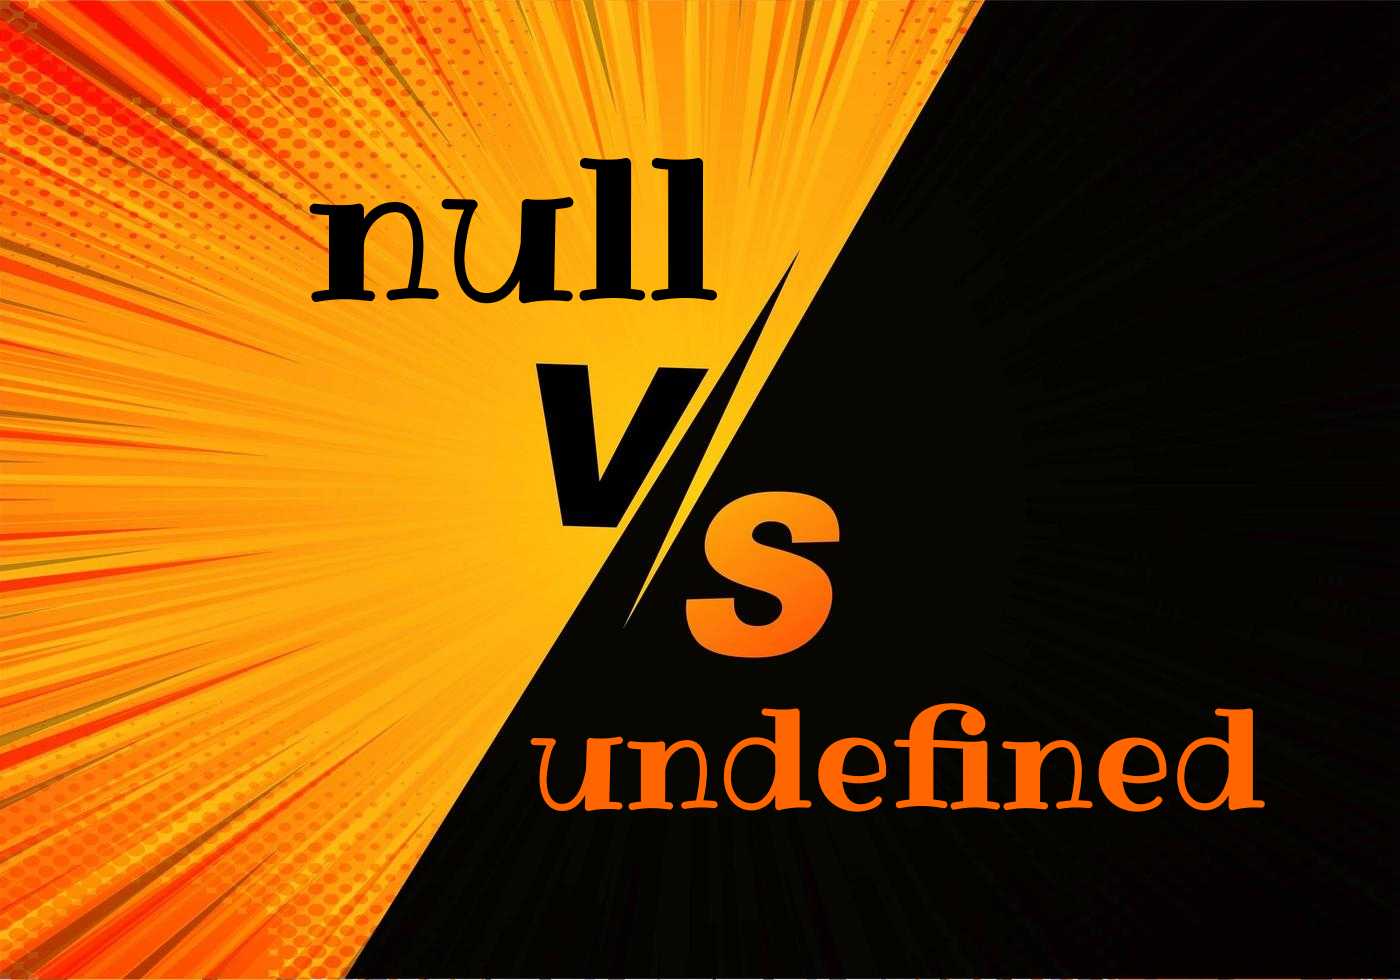 null vs undefined